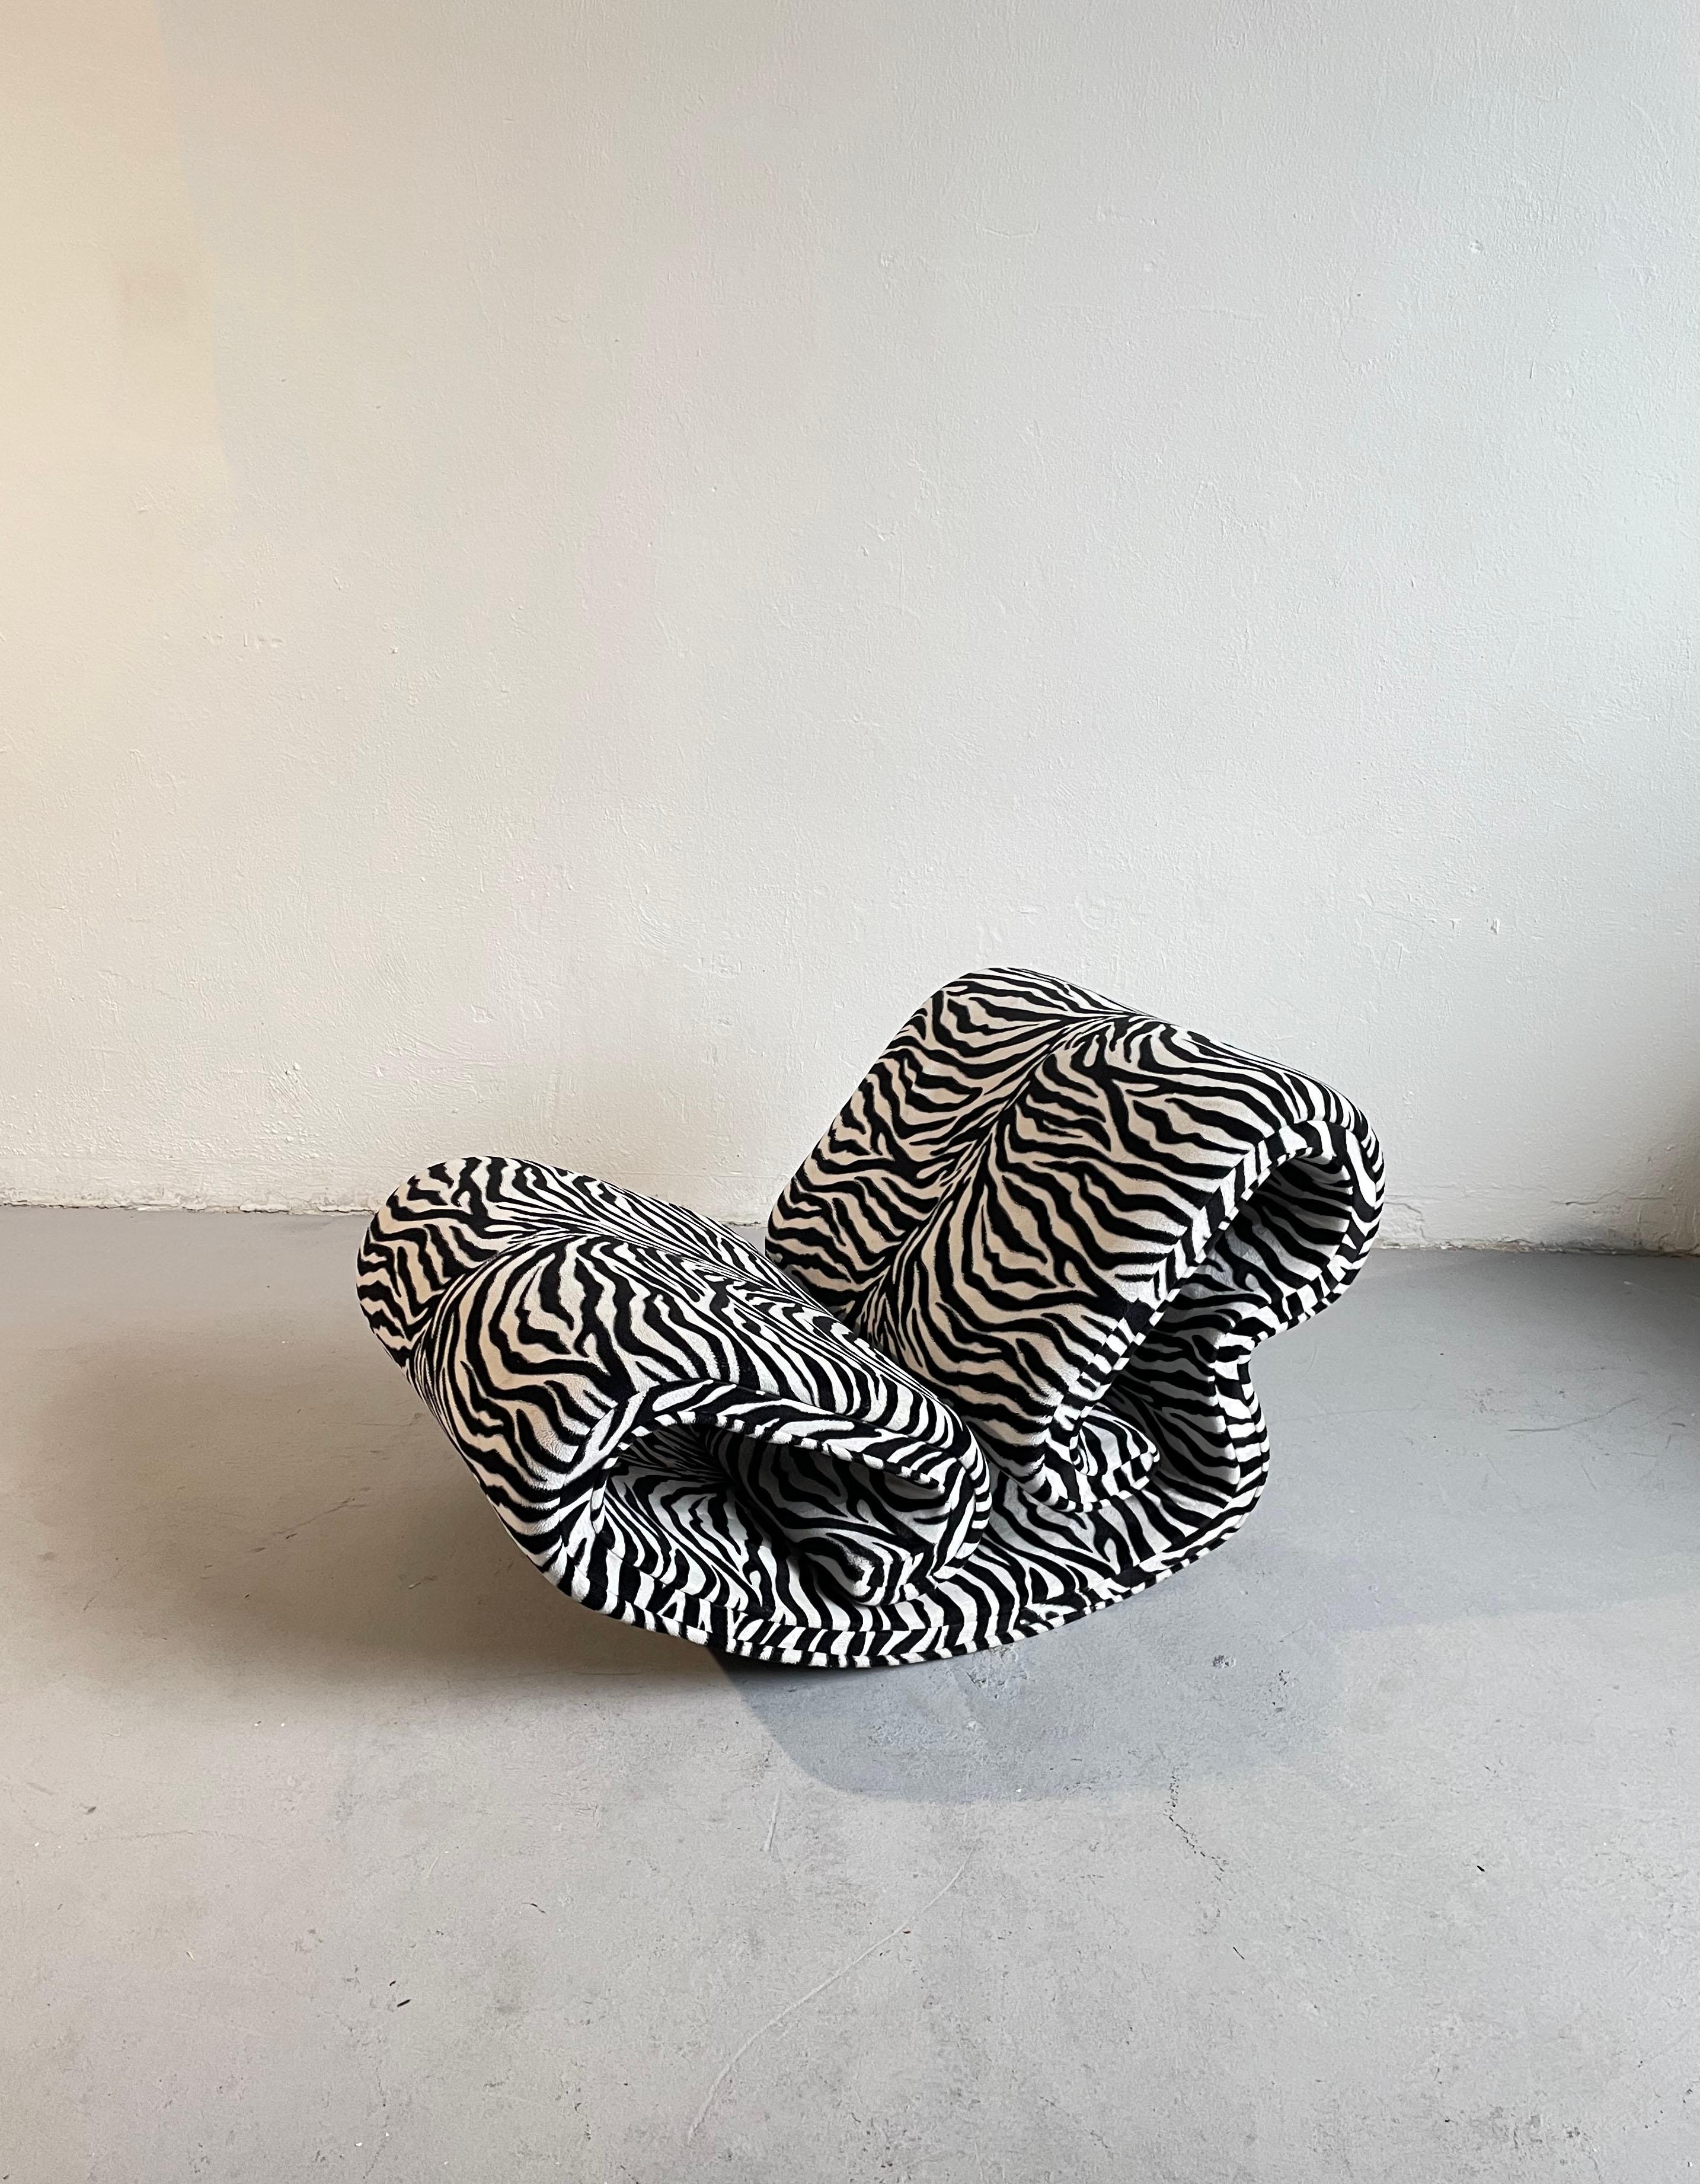 Vintage rocking lounge chair upholstered in fabric with zebra pattern

Unknown producer

Age: circa 1970s

The heavy frame is made of metal and plywood, padded and upholstered in fabric

Condition: the chair is in good used condition, with